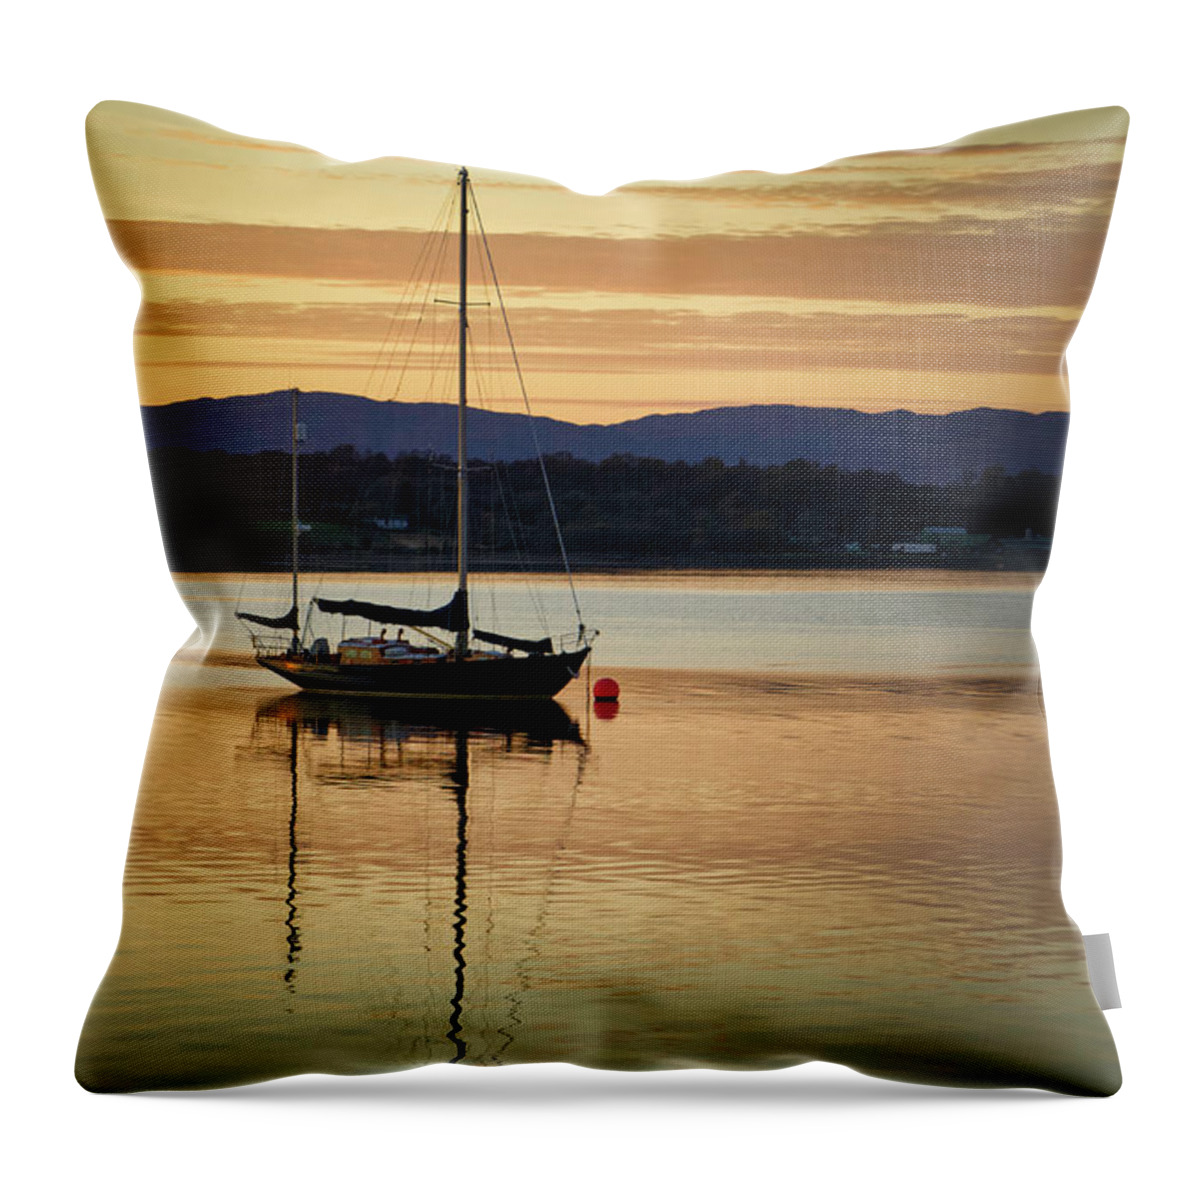 Blue Throw Pillow featuring the photograph Boat On A Lake at Sunset by Rick Deacon